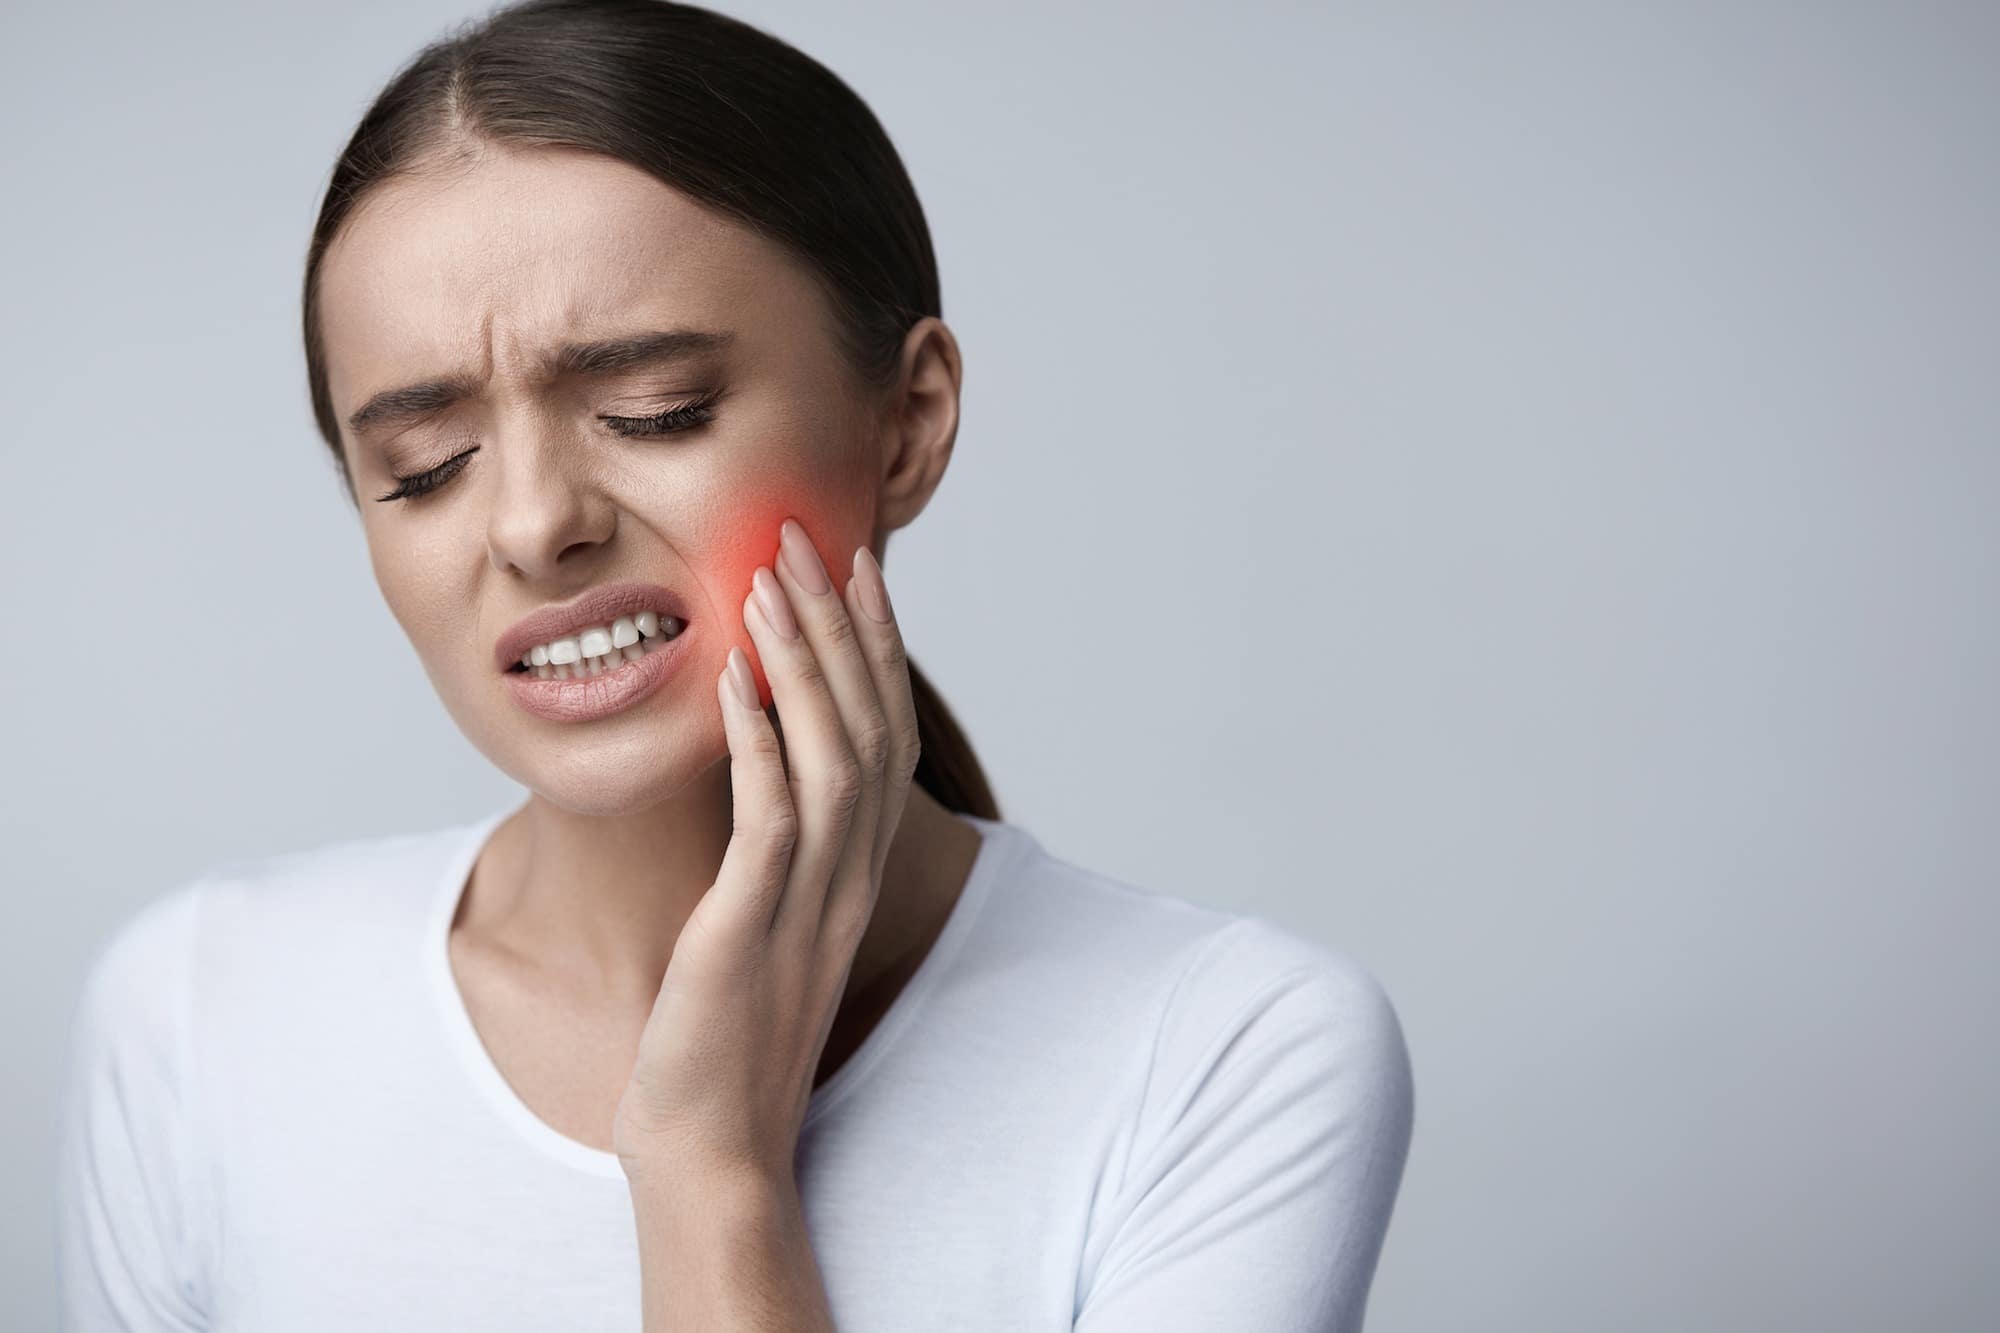 How can i stop tooth pain at night?